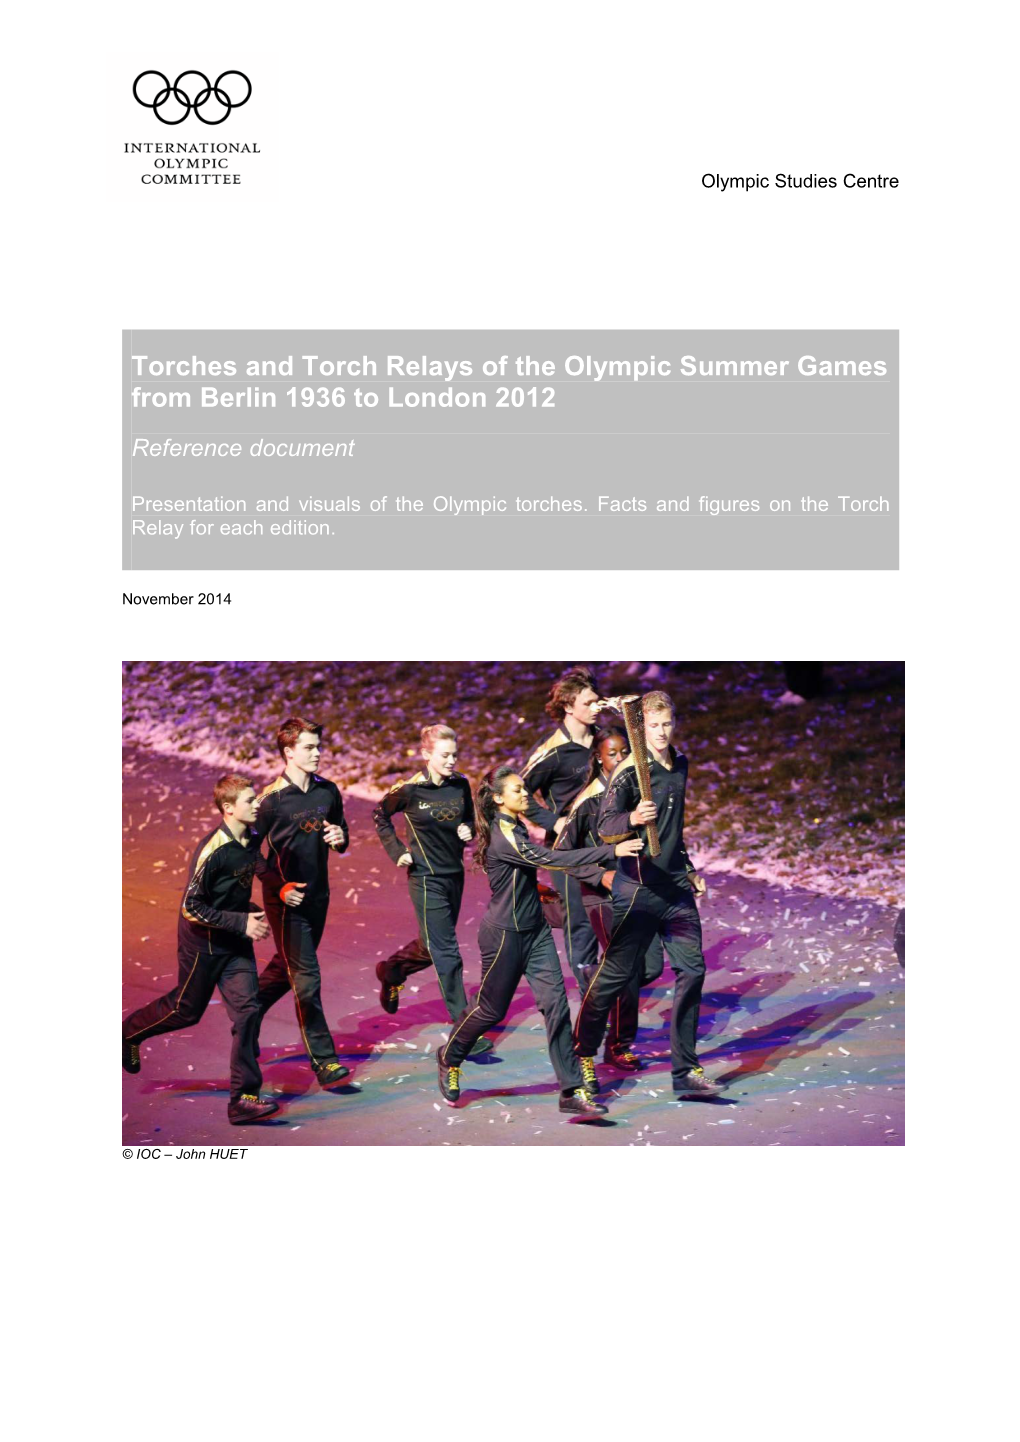 Torches and Torch Relays of the Olympic Summer Games from Berlin 1936 to London 2012 Reference Document